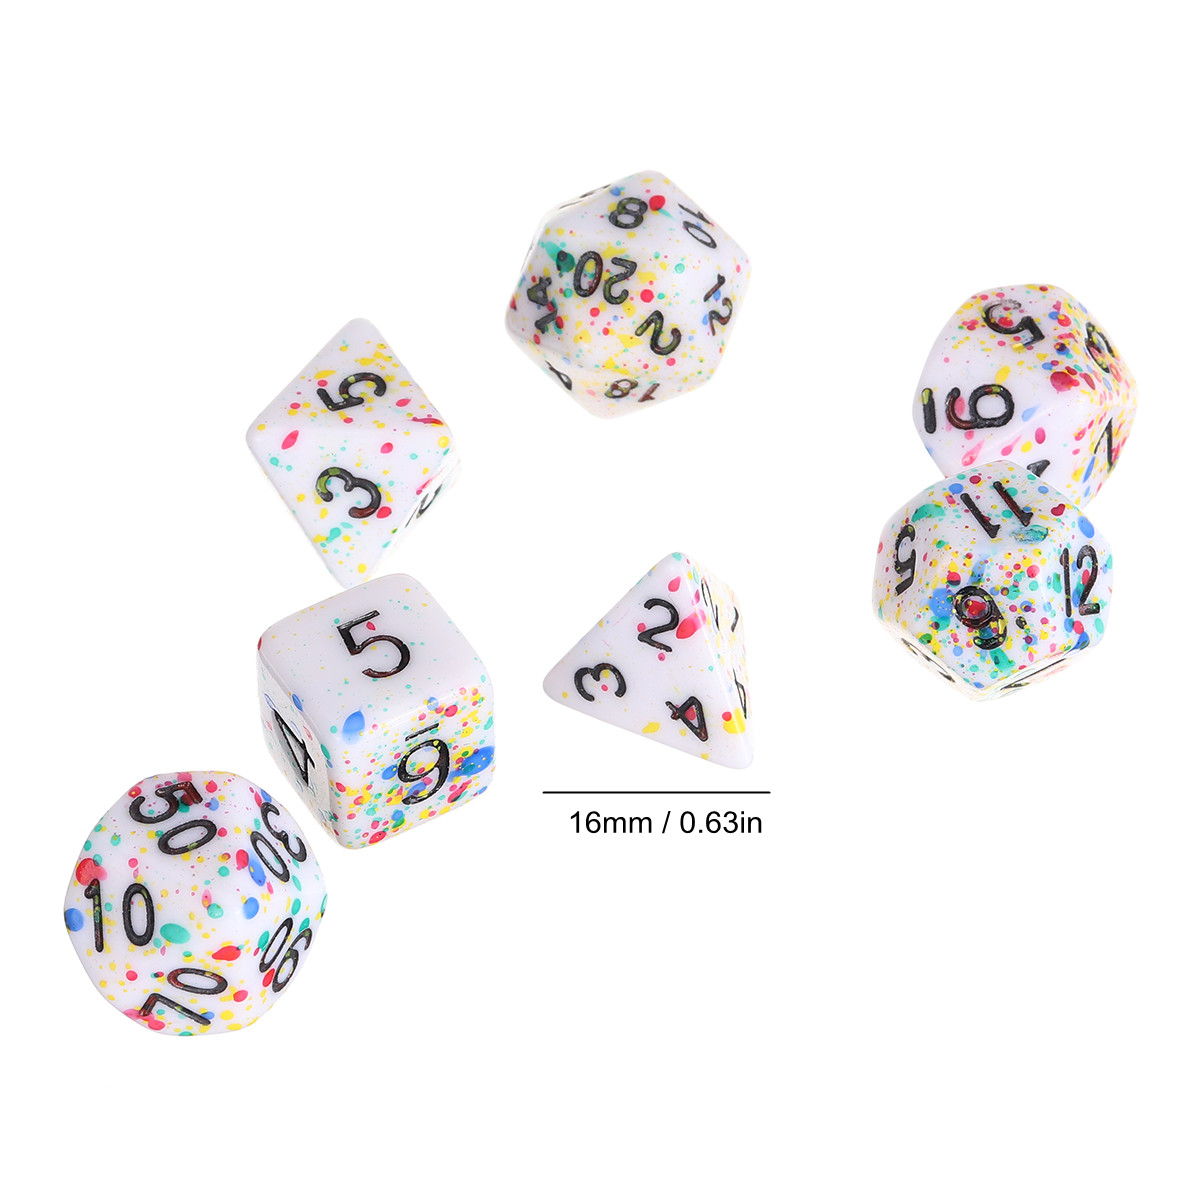 7Pcs-Acrylic-Polyhedral-Dice-Set-Colorful-Board-Game-Multisided-Dices-Gadget-1690588-6